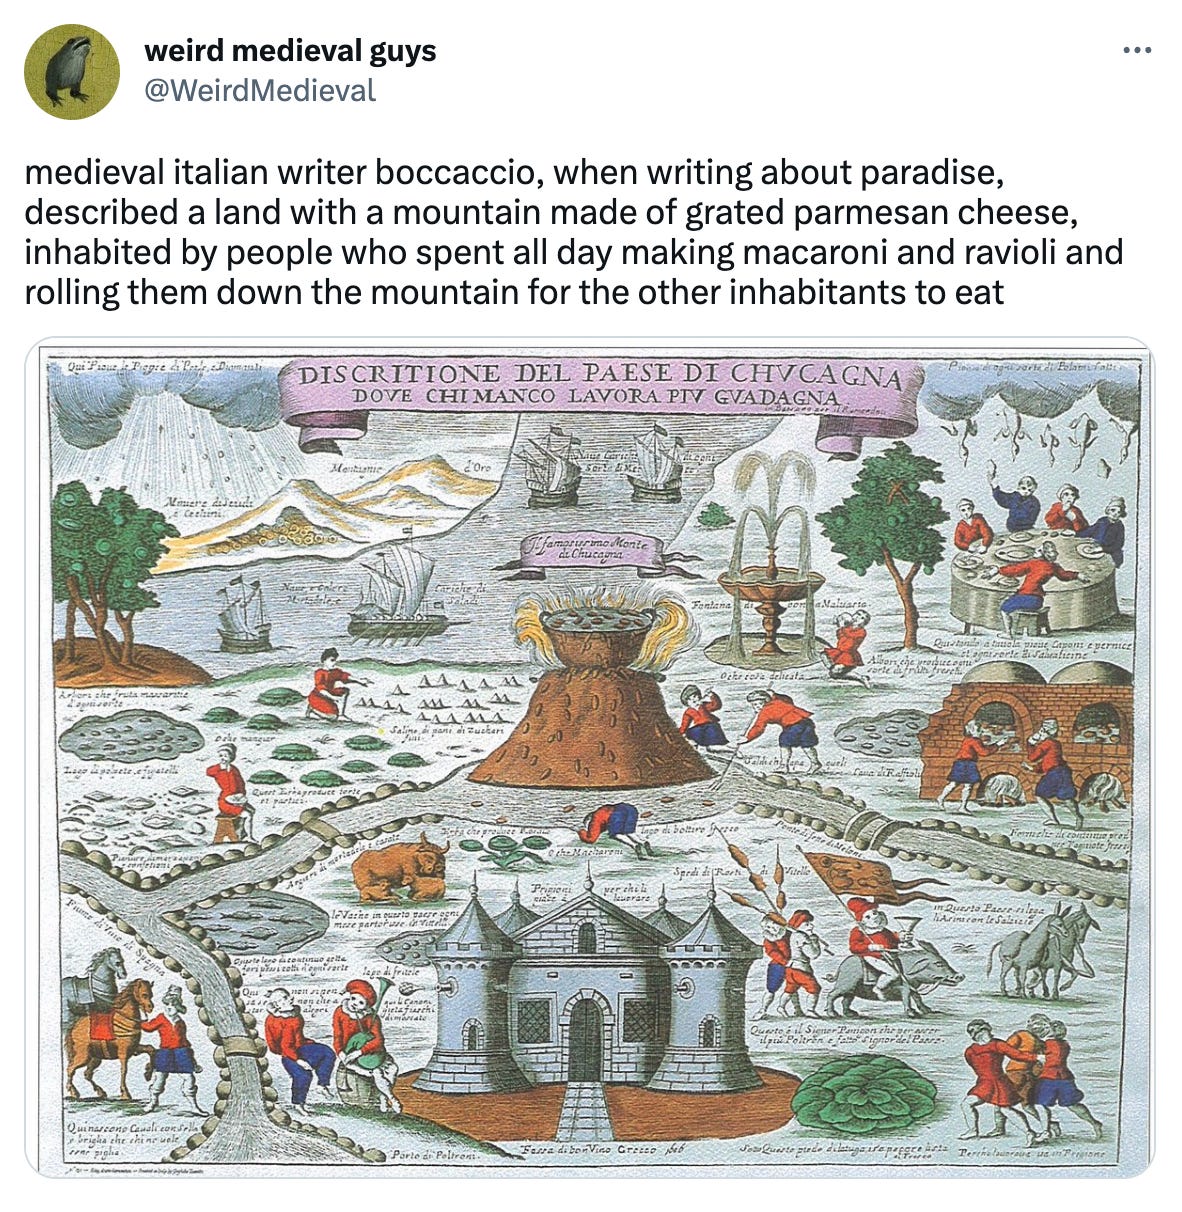 a tweet from weird medieval guys (@weirdmedeival) that reads "medieval italian writer boccaccio, when writing about paradise, described a land with a mountain made of grated parmesan cheese, inhabited by people who spent all day making macaroni and ravioli and rolling them down the mountain for the other inhabitants to eat" and features an associated image with a tiny castle and people around a table and farming what i can only assume is cheese mountain